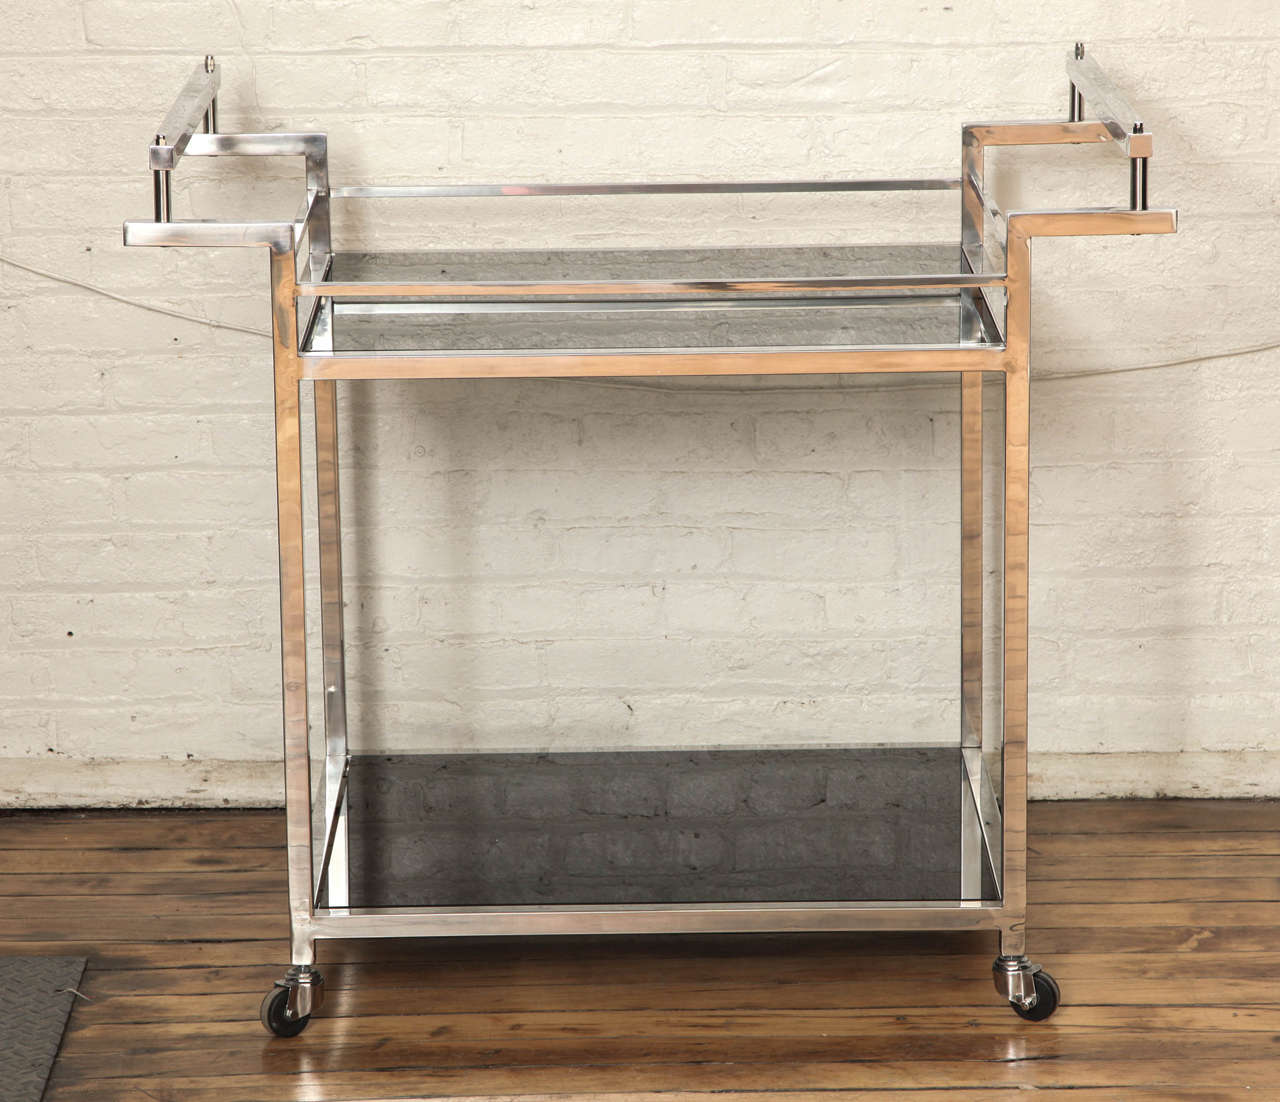 A modernist rolling bar of great proportion. Polished nickel with smoked glass shelves.